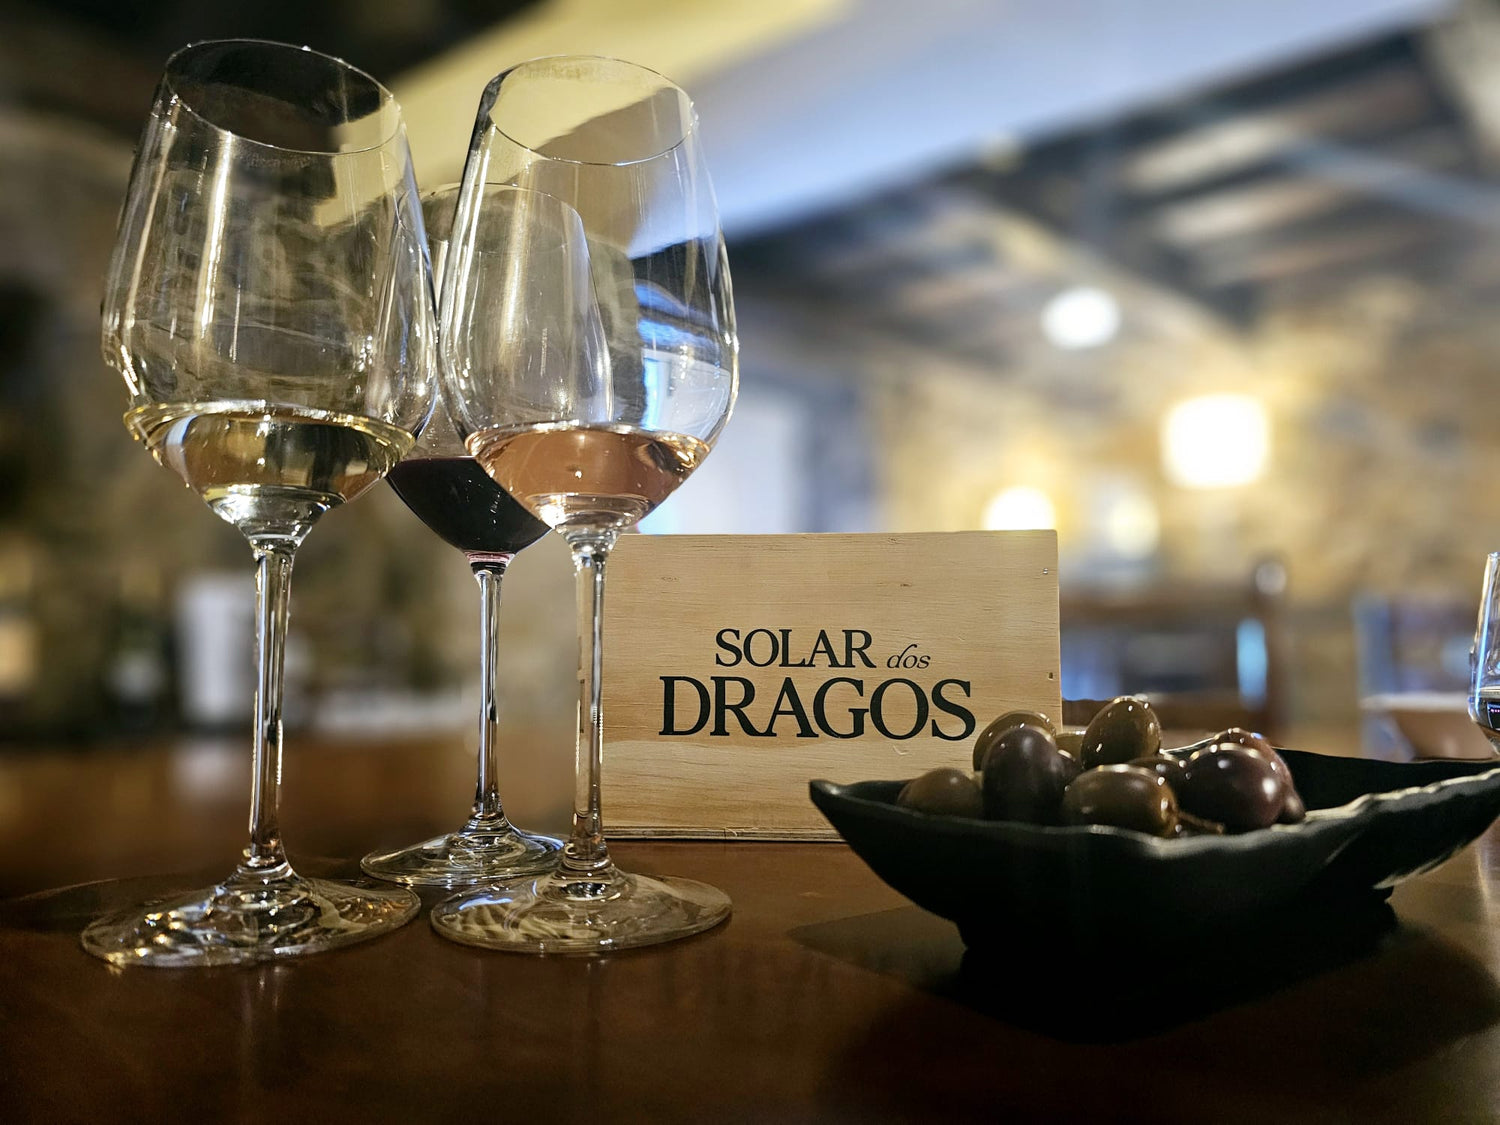 Port wine and table wine from Douro Valley